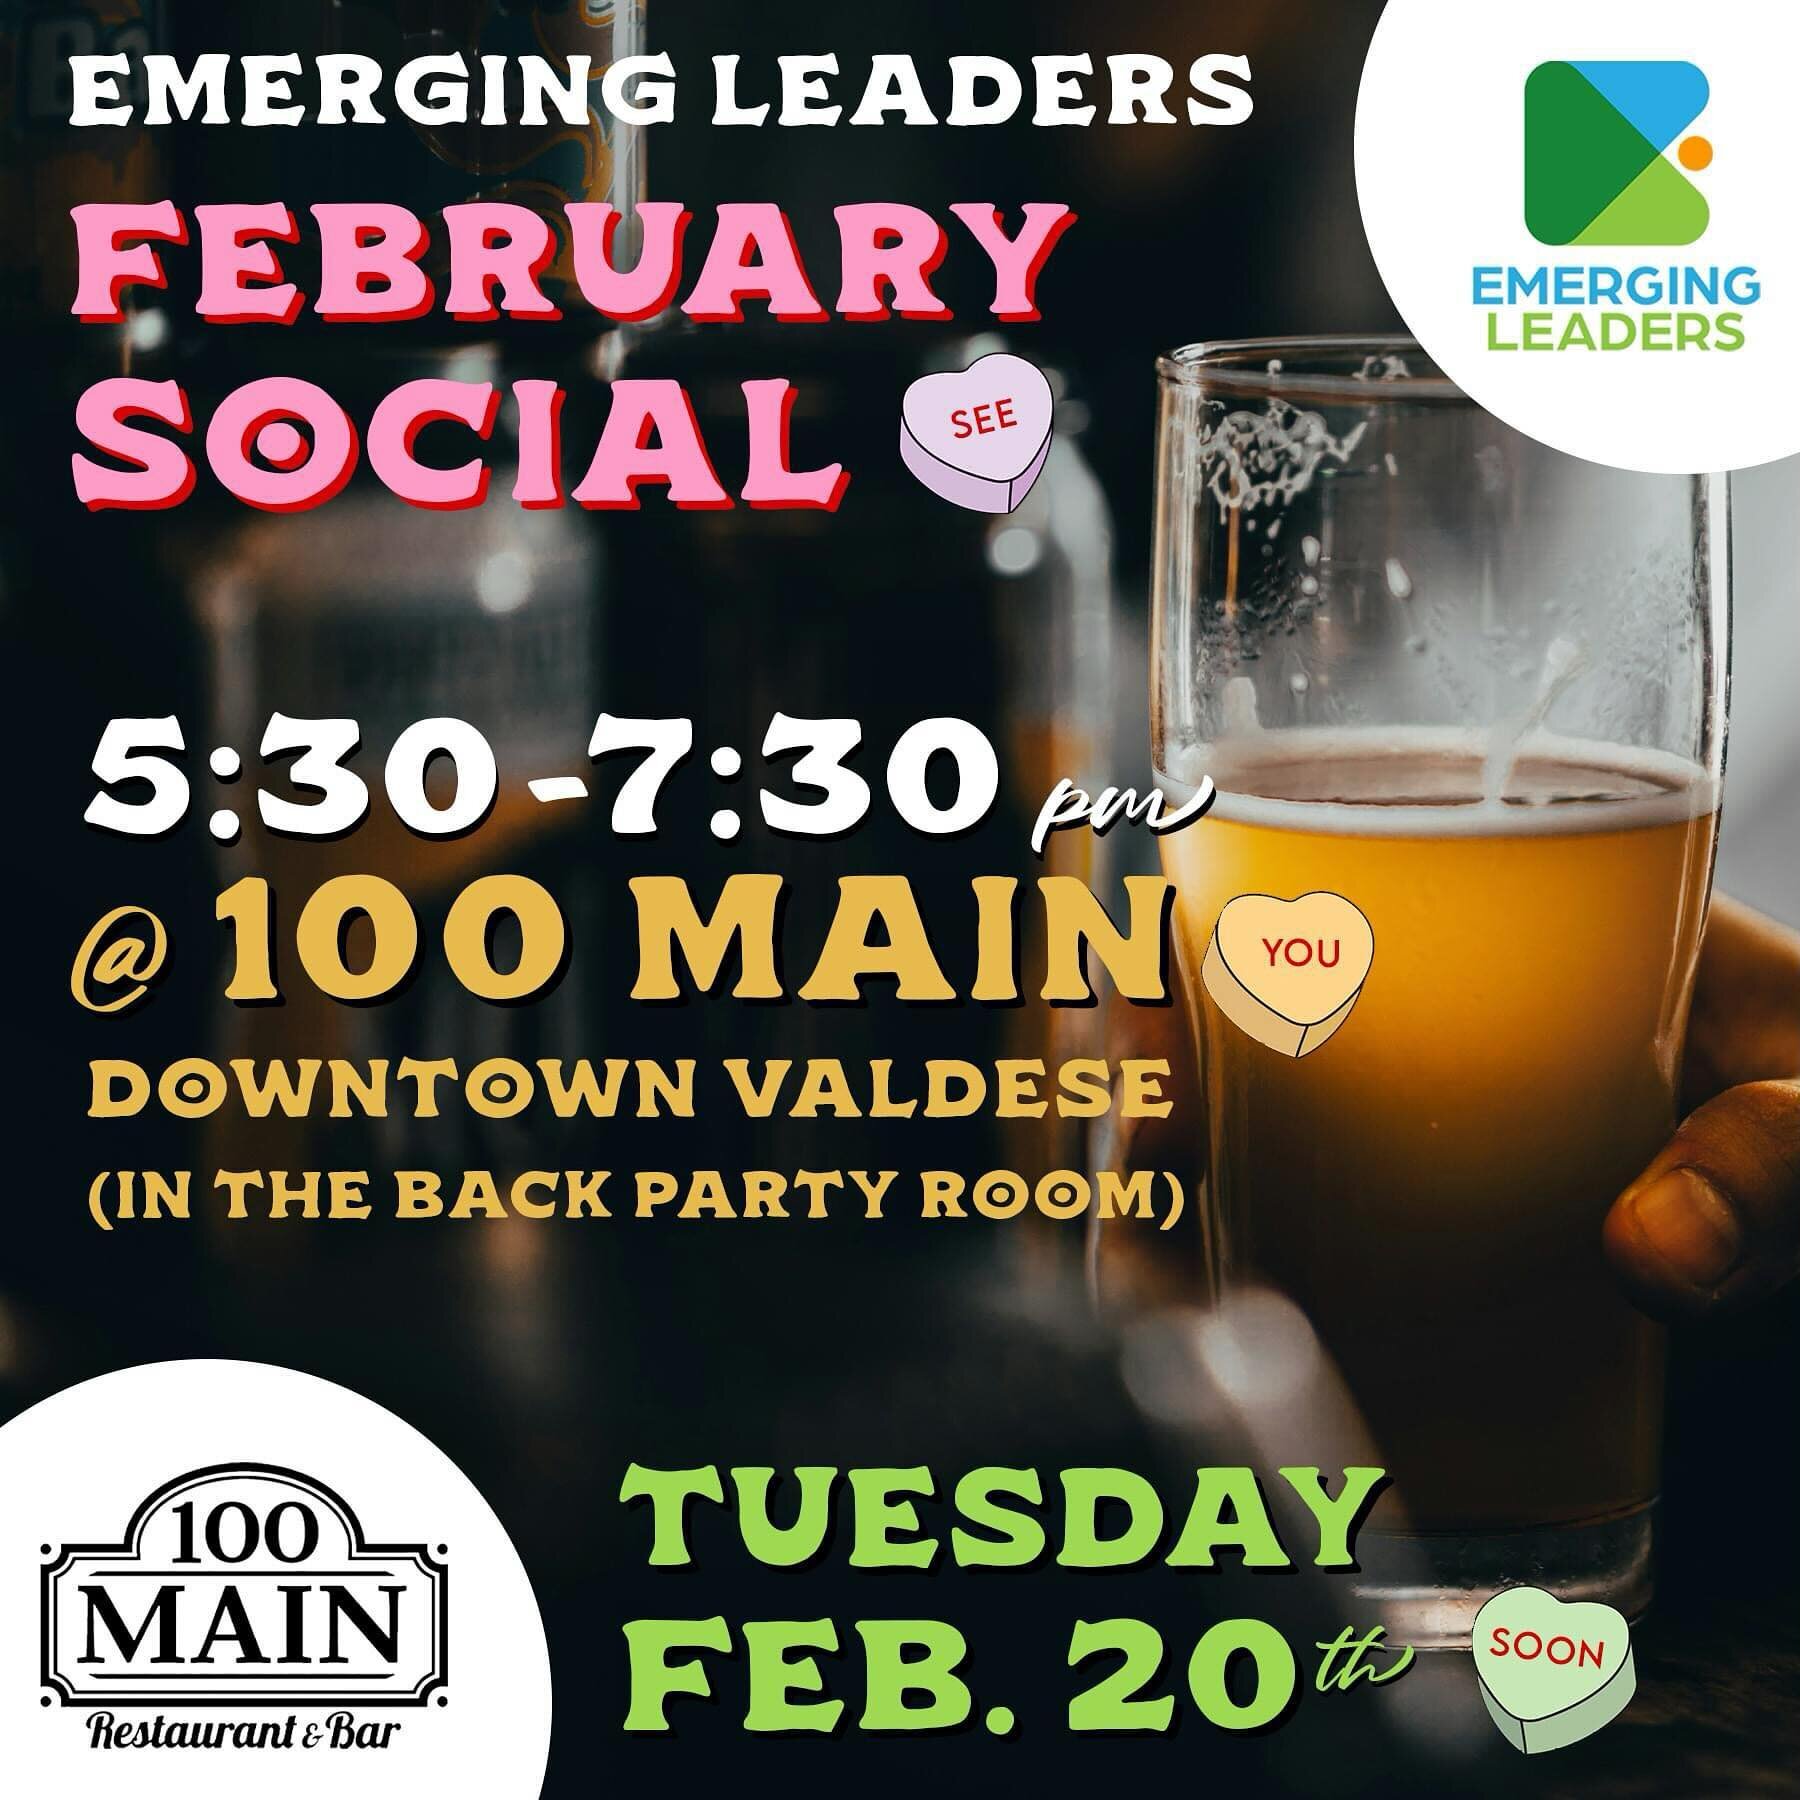 Happy Valentine&rsquo;s Day, friends! 🩷❤️💘
We have a slight detail change for our February Social @ 100 Main: Note that we will be in the back party room on the main floor of 100 Main and not in the loft. See you next Tuesday :)
&mdash;
Join us Tue